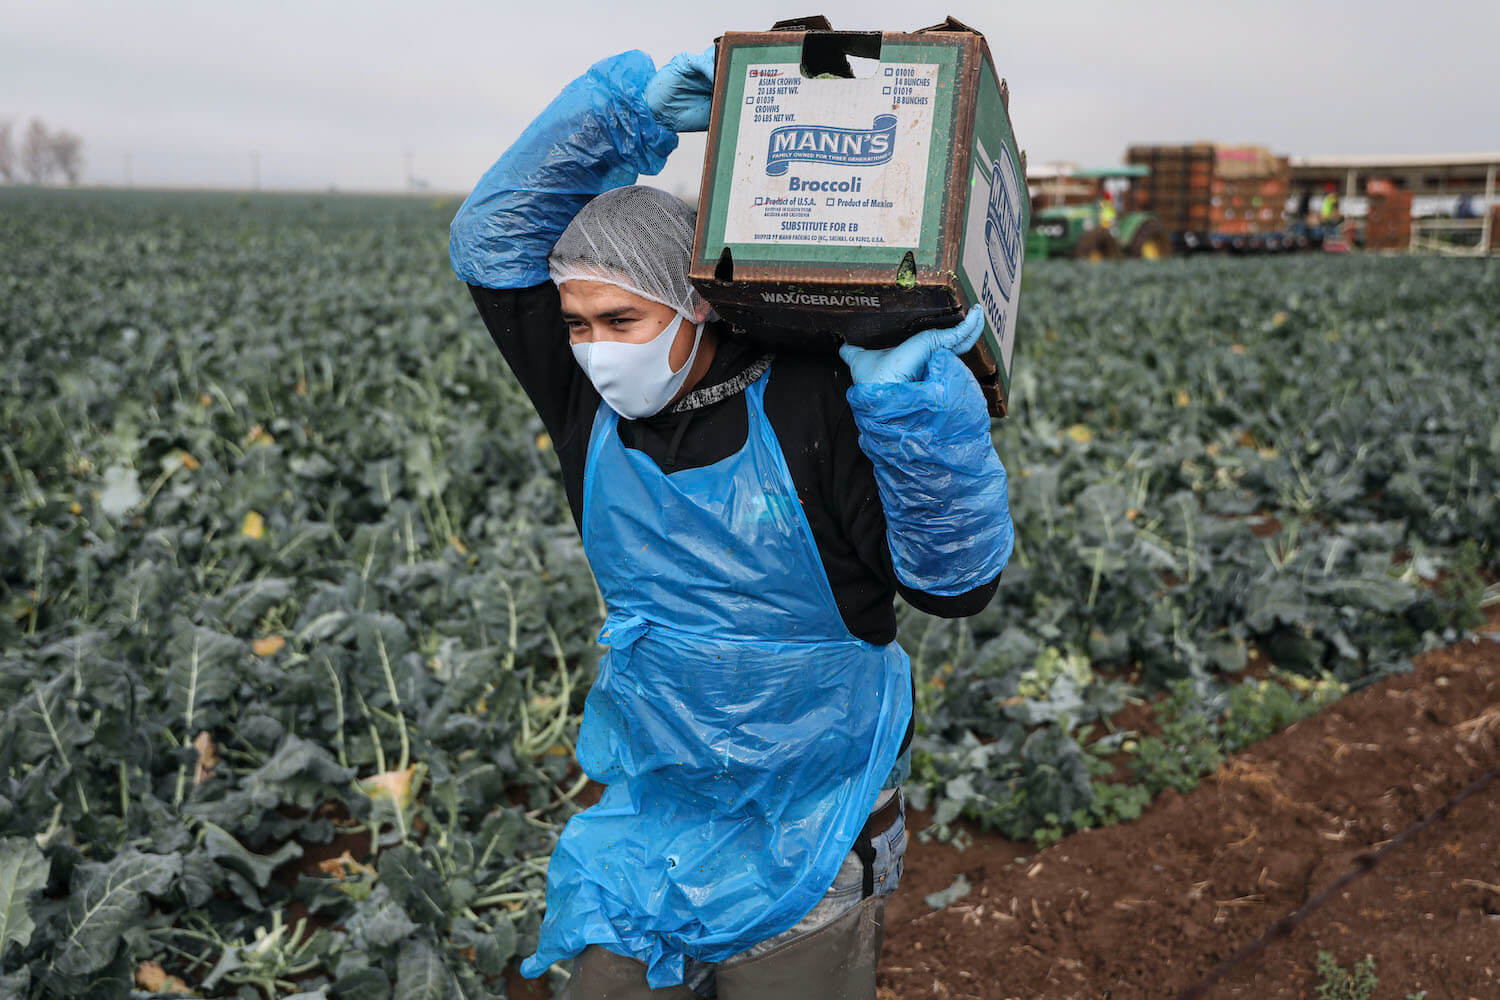 A farmworker carries a box of broccoli in a field on January 22, 2021 in Calexico, California. March 2021